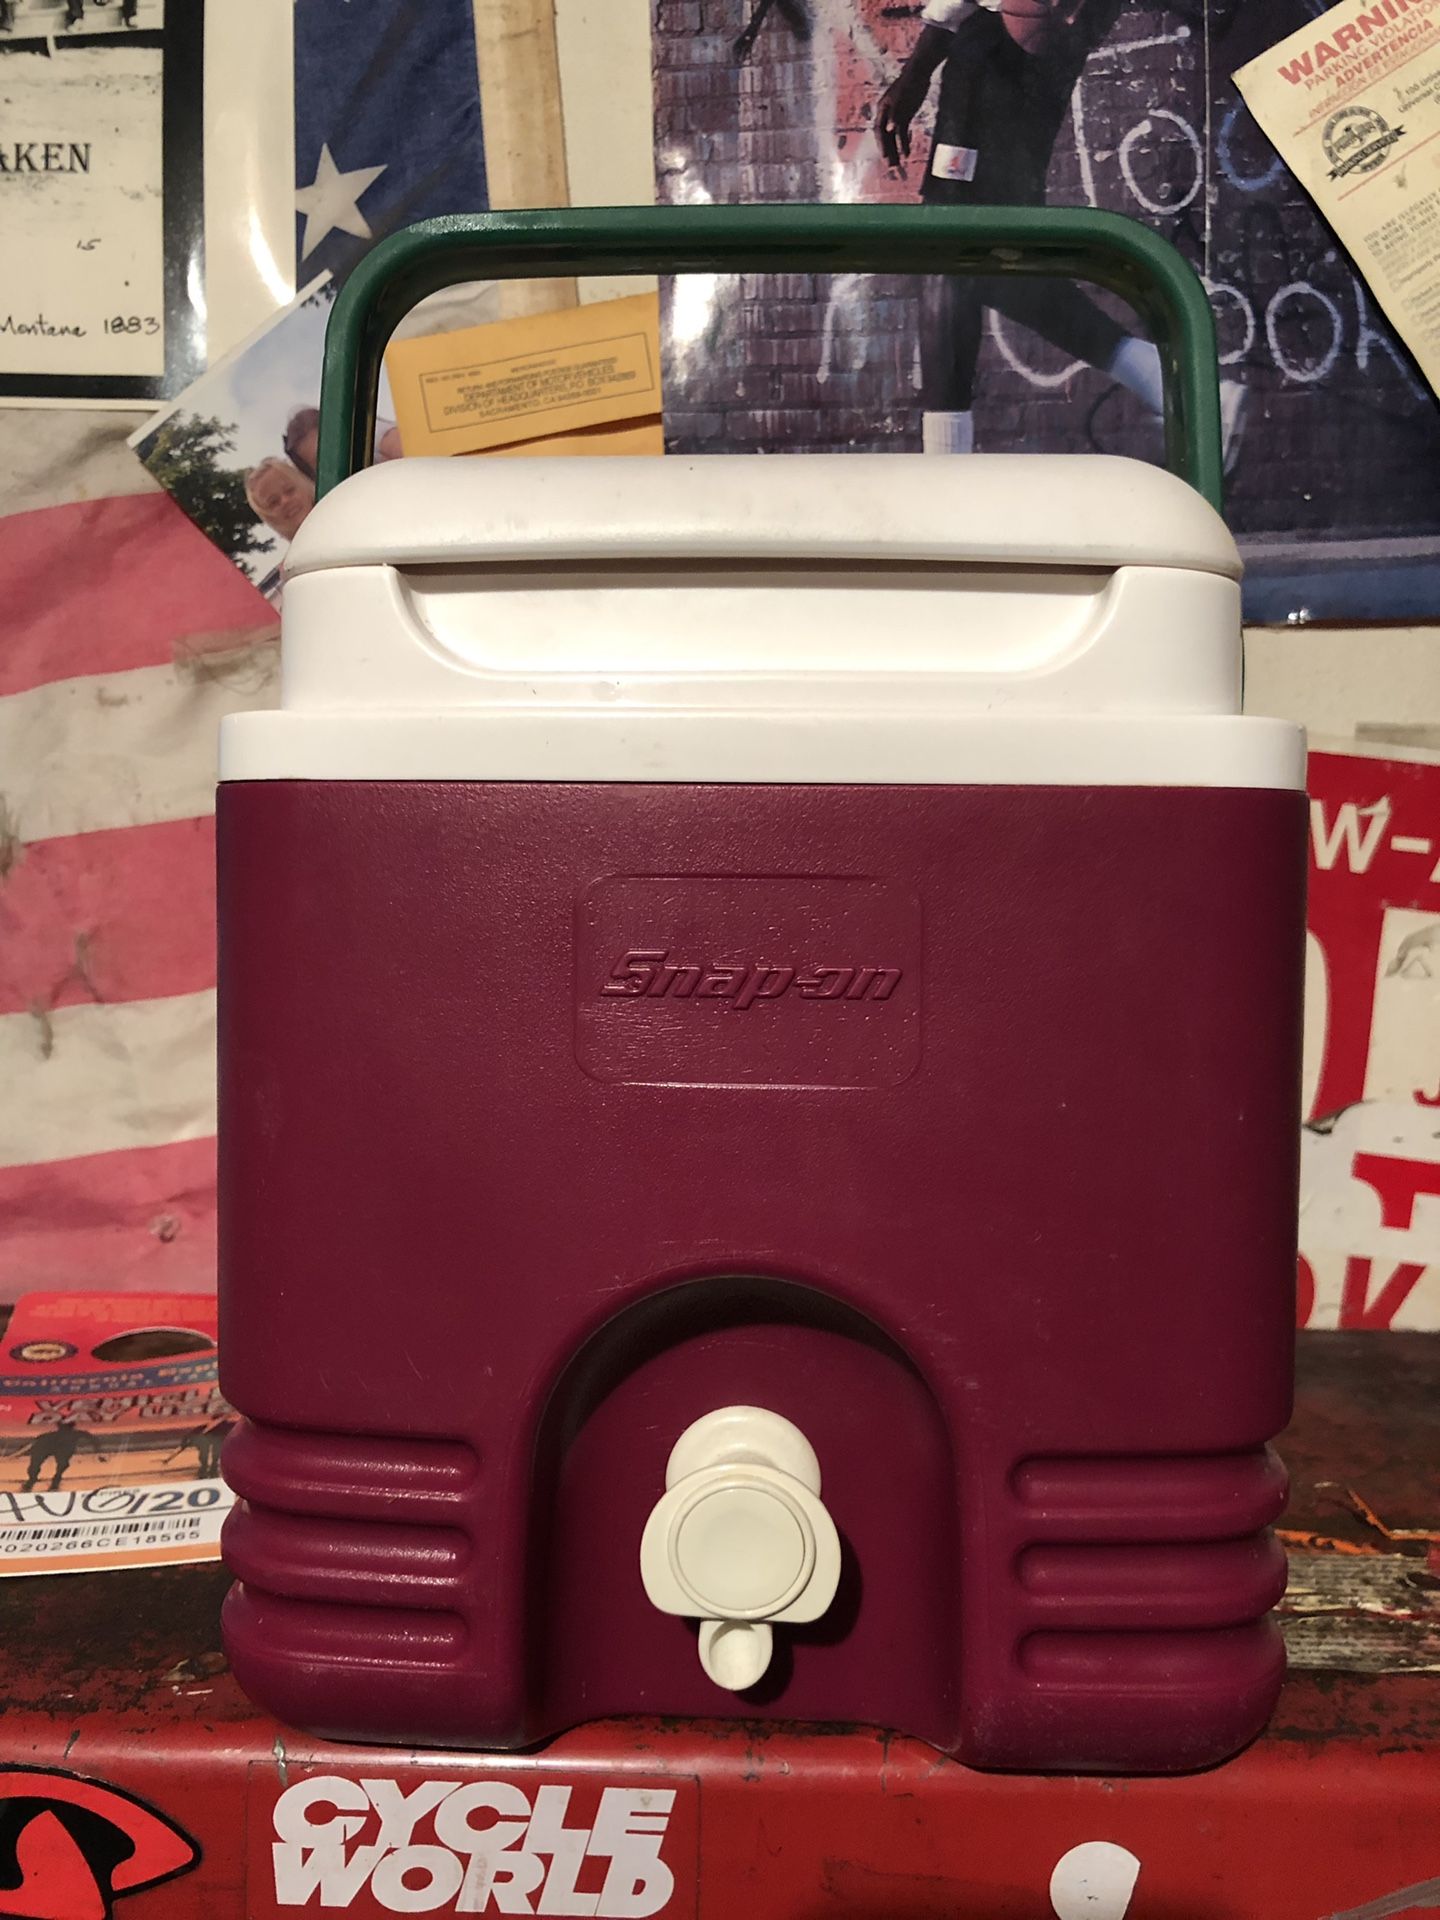 Snap-on cooler igloo snapon tools 1 gallon with spout